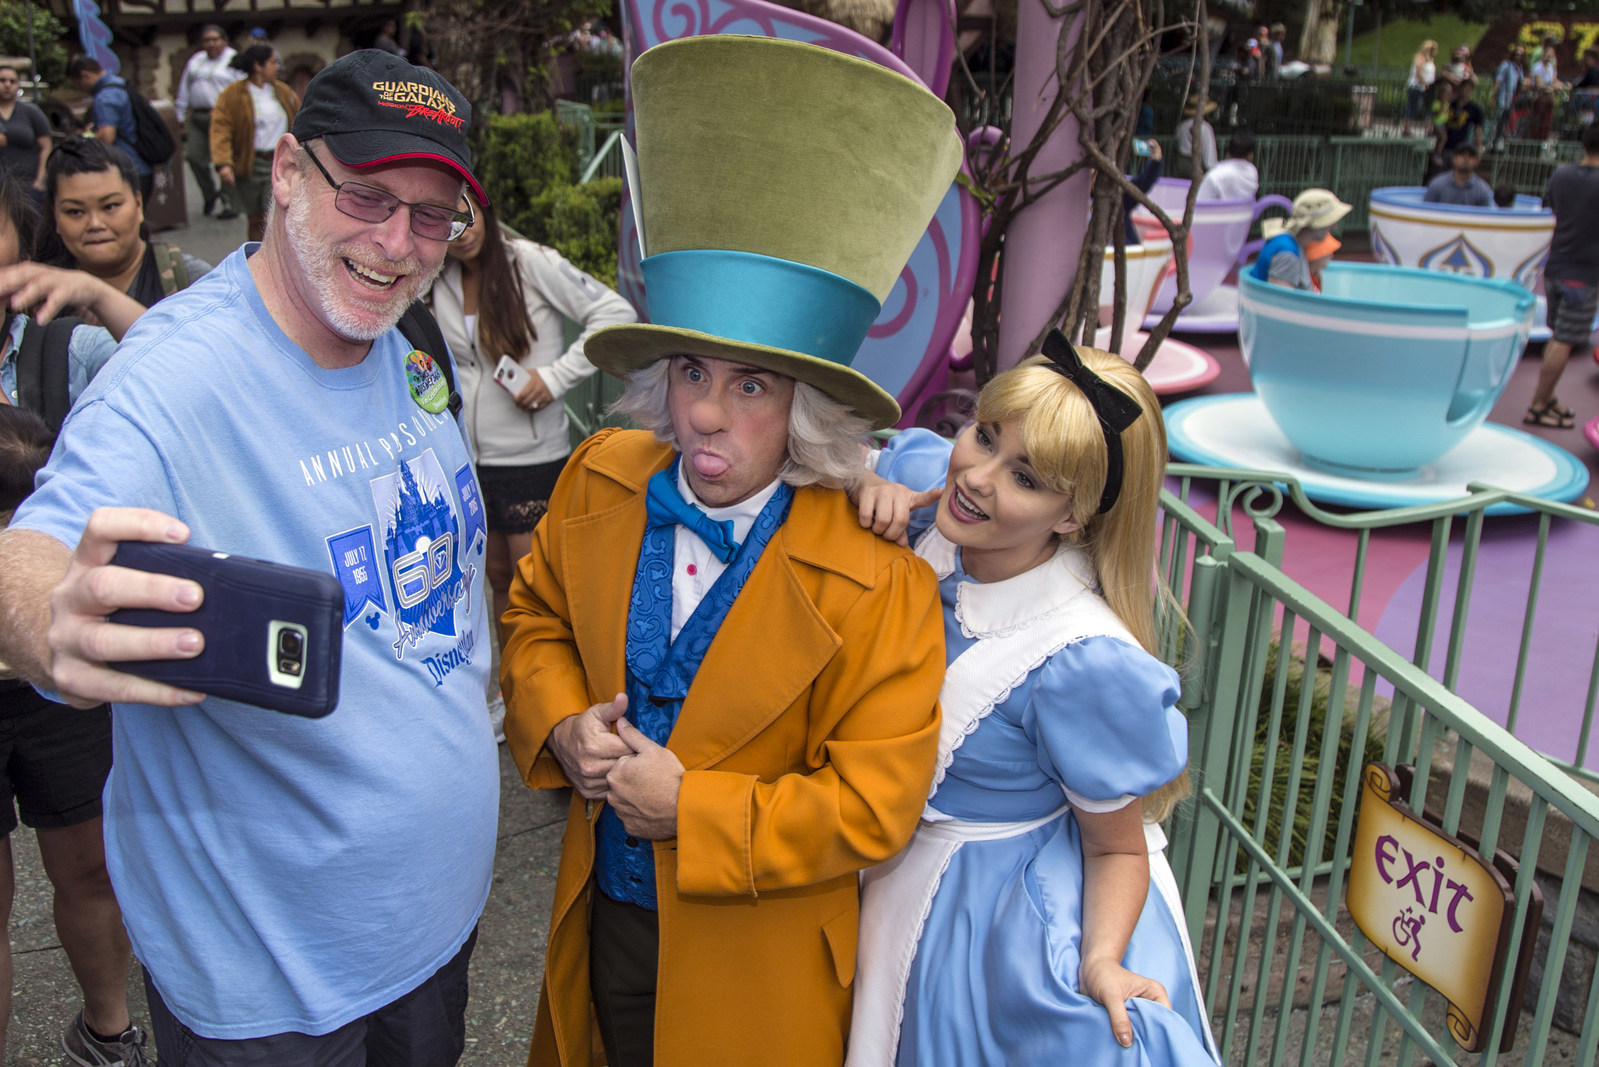 Jeff Reitz, who has visited the parks of the Disneyland Resort every day since January 1, 2012, marked his 2,000th consecutive visit on Thursday, June 22